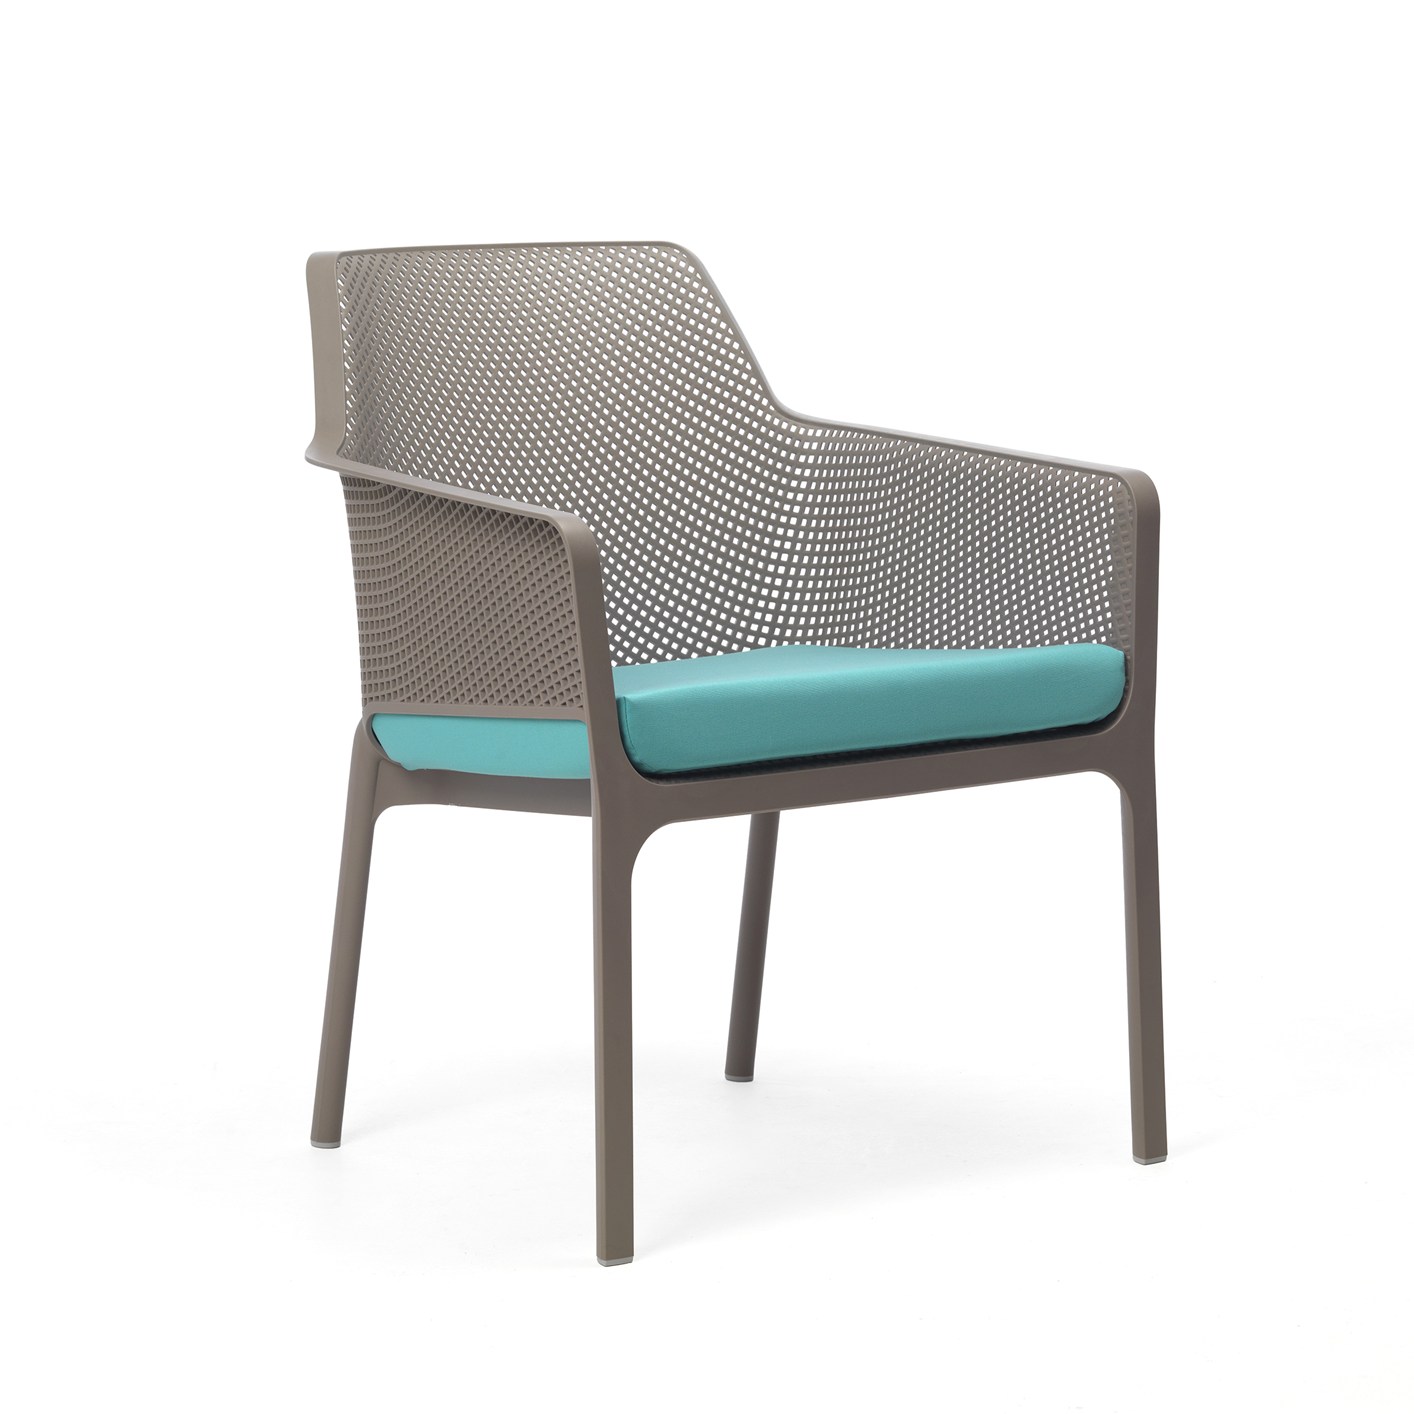 Net Relax Outdoor Chair by Raffaello Galiotto for Nardi